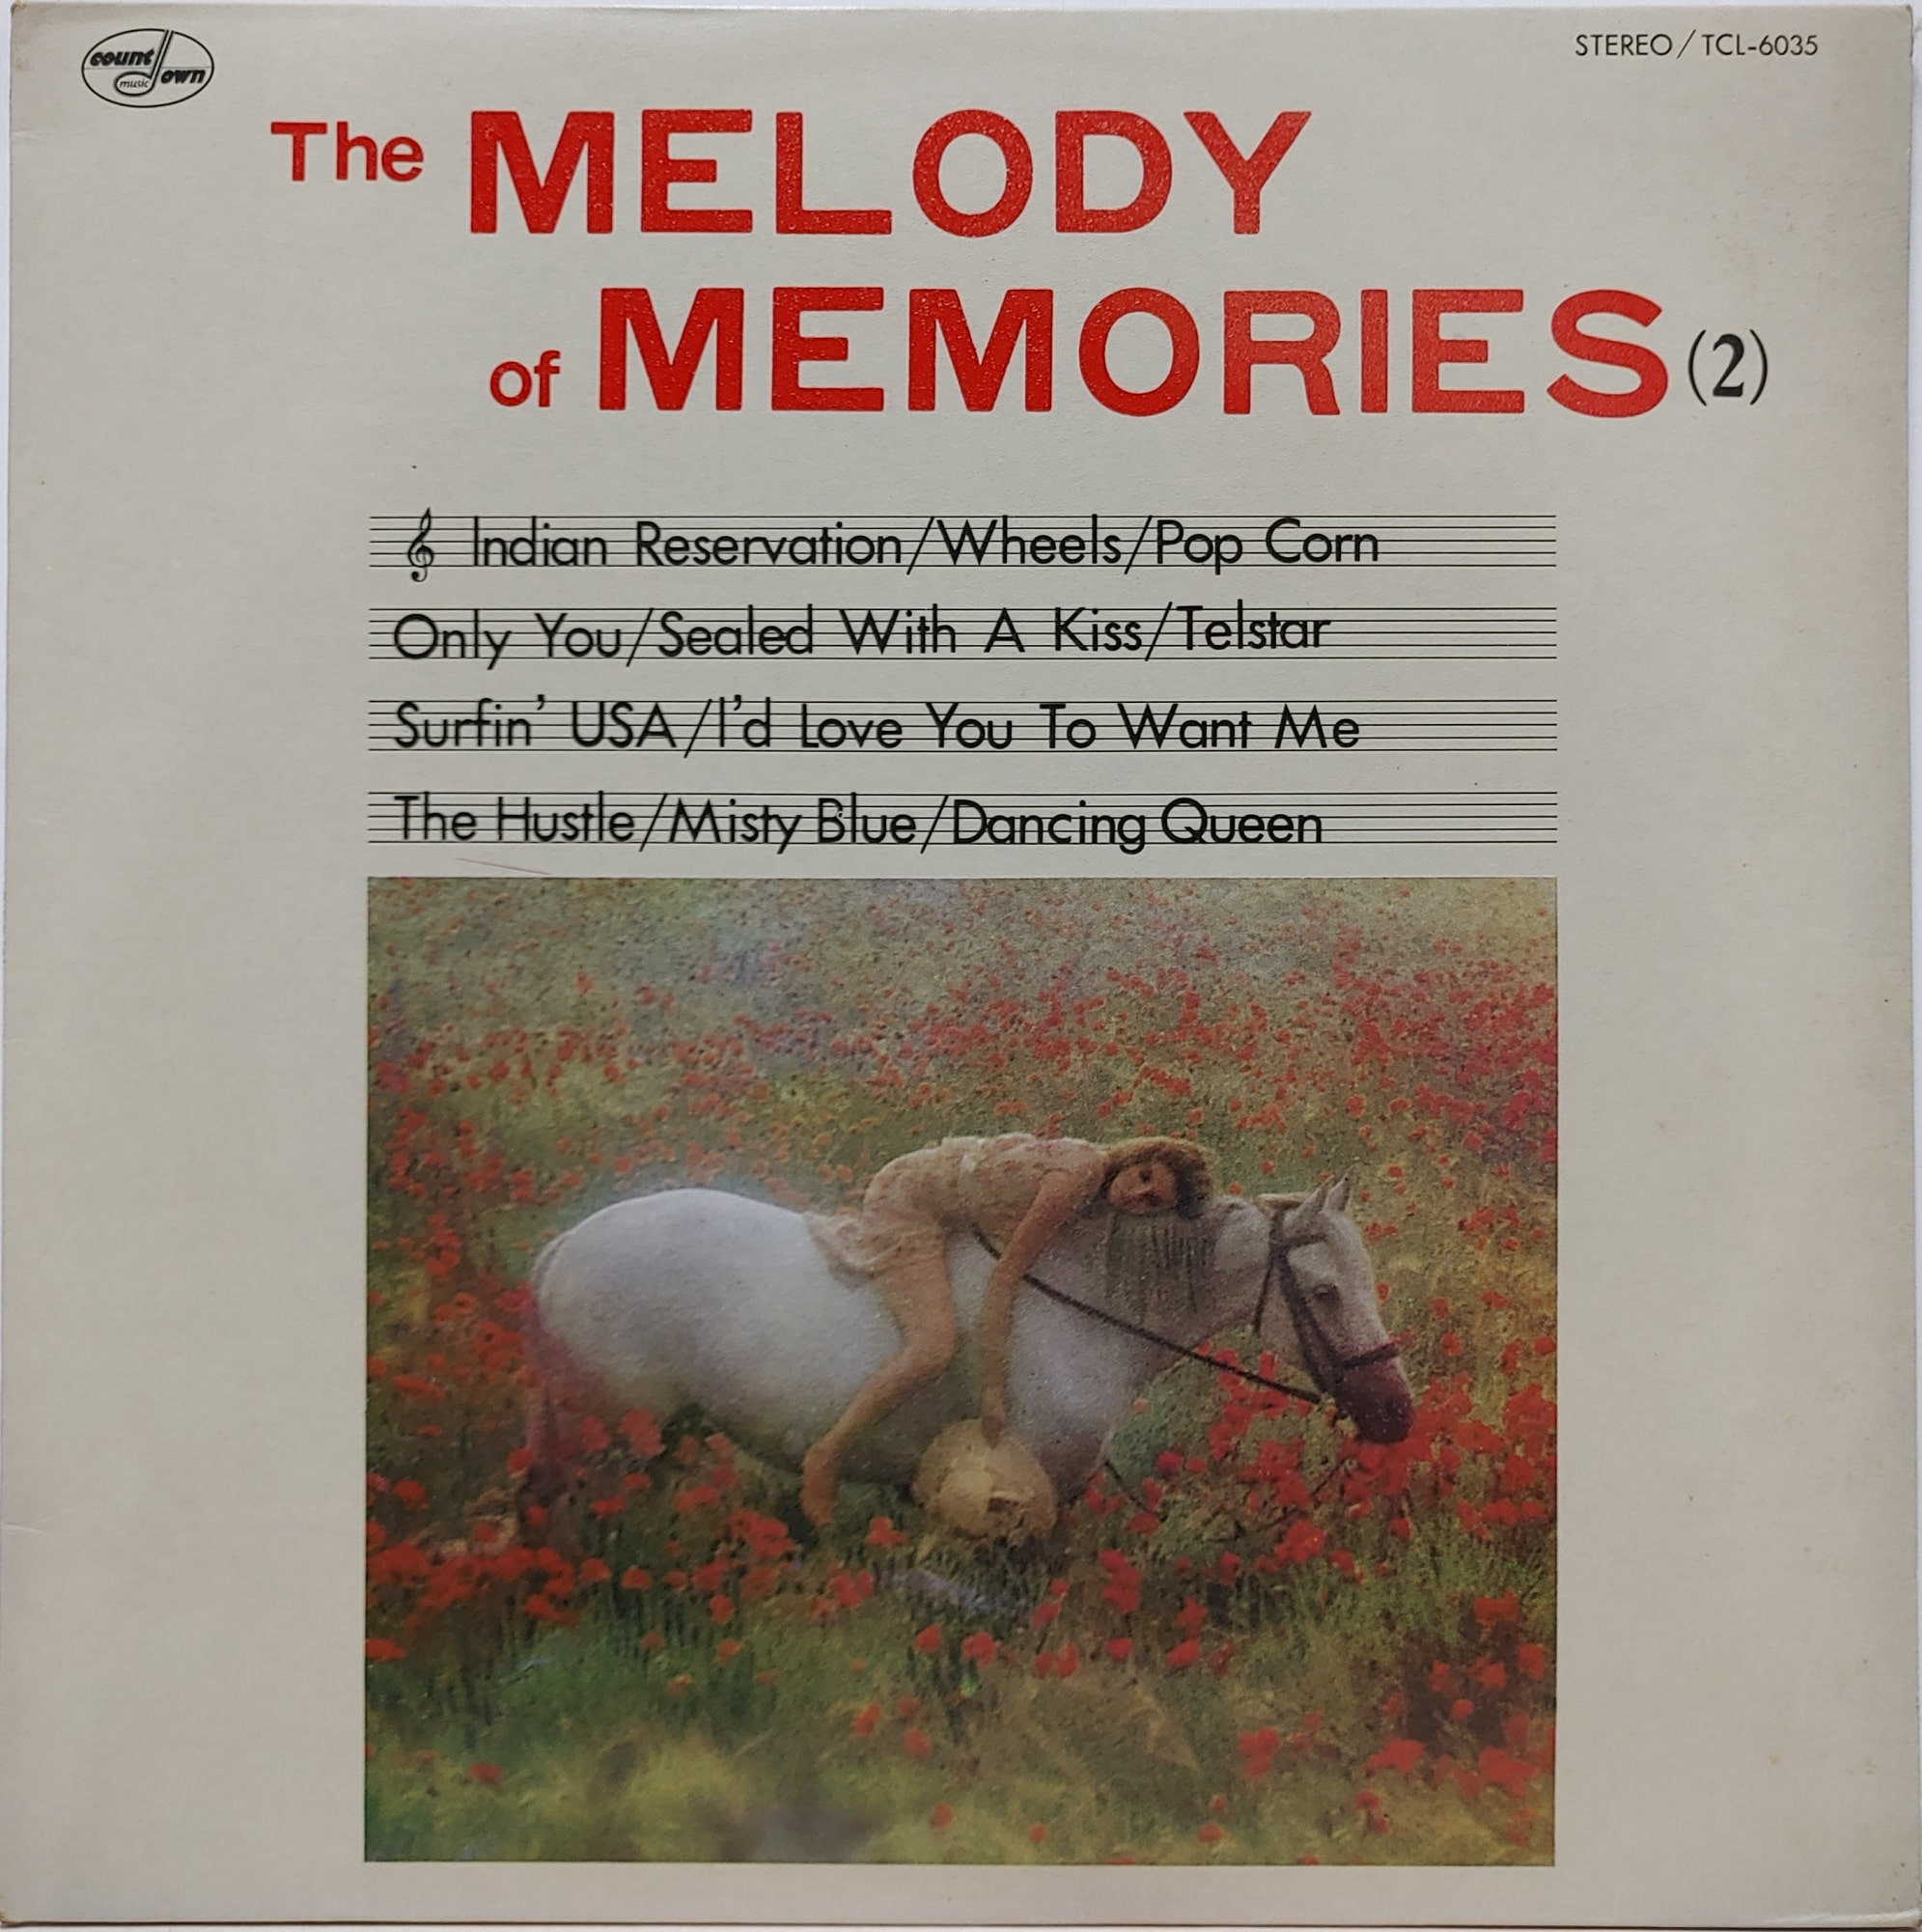 The MELODY of MEMORIES (2)